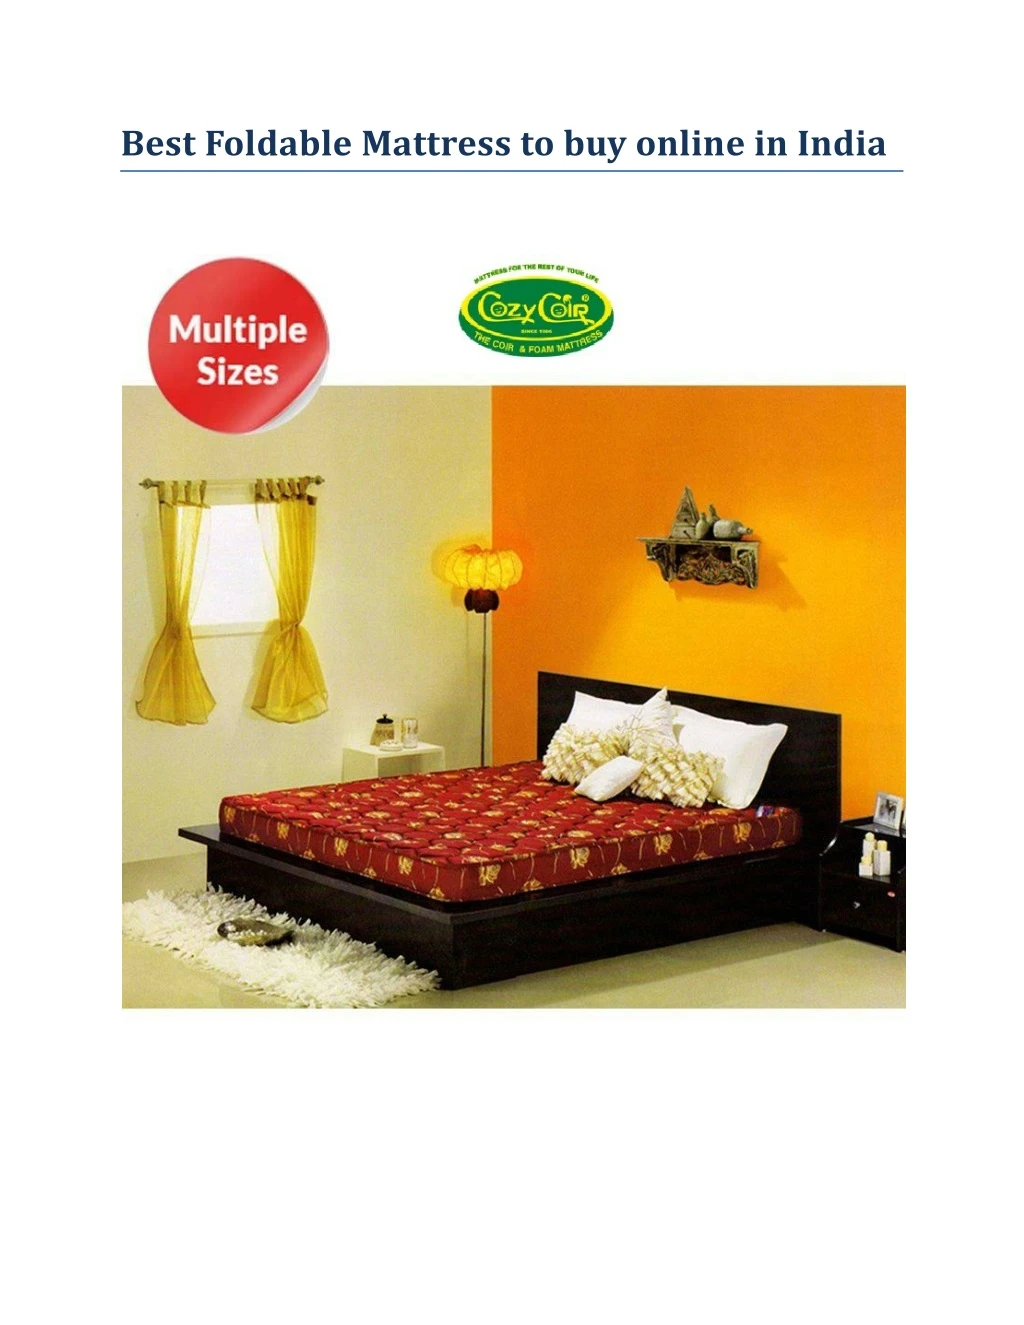 best foldable mattress to buy online in india